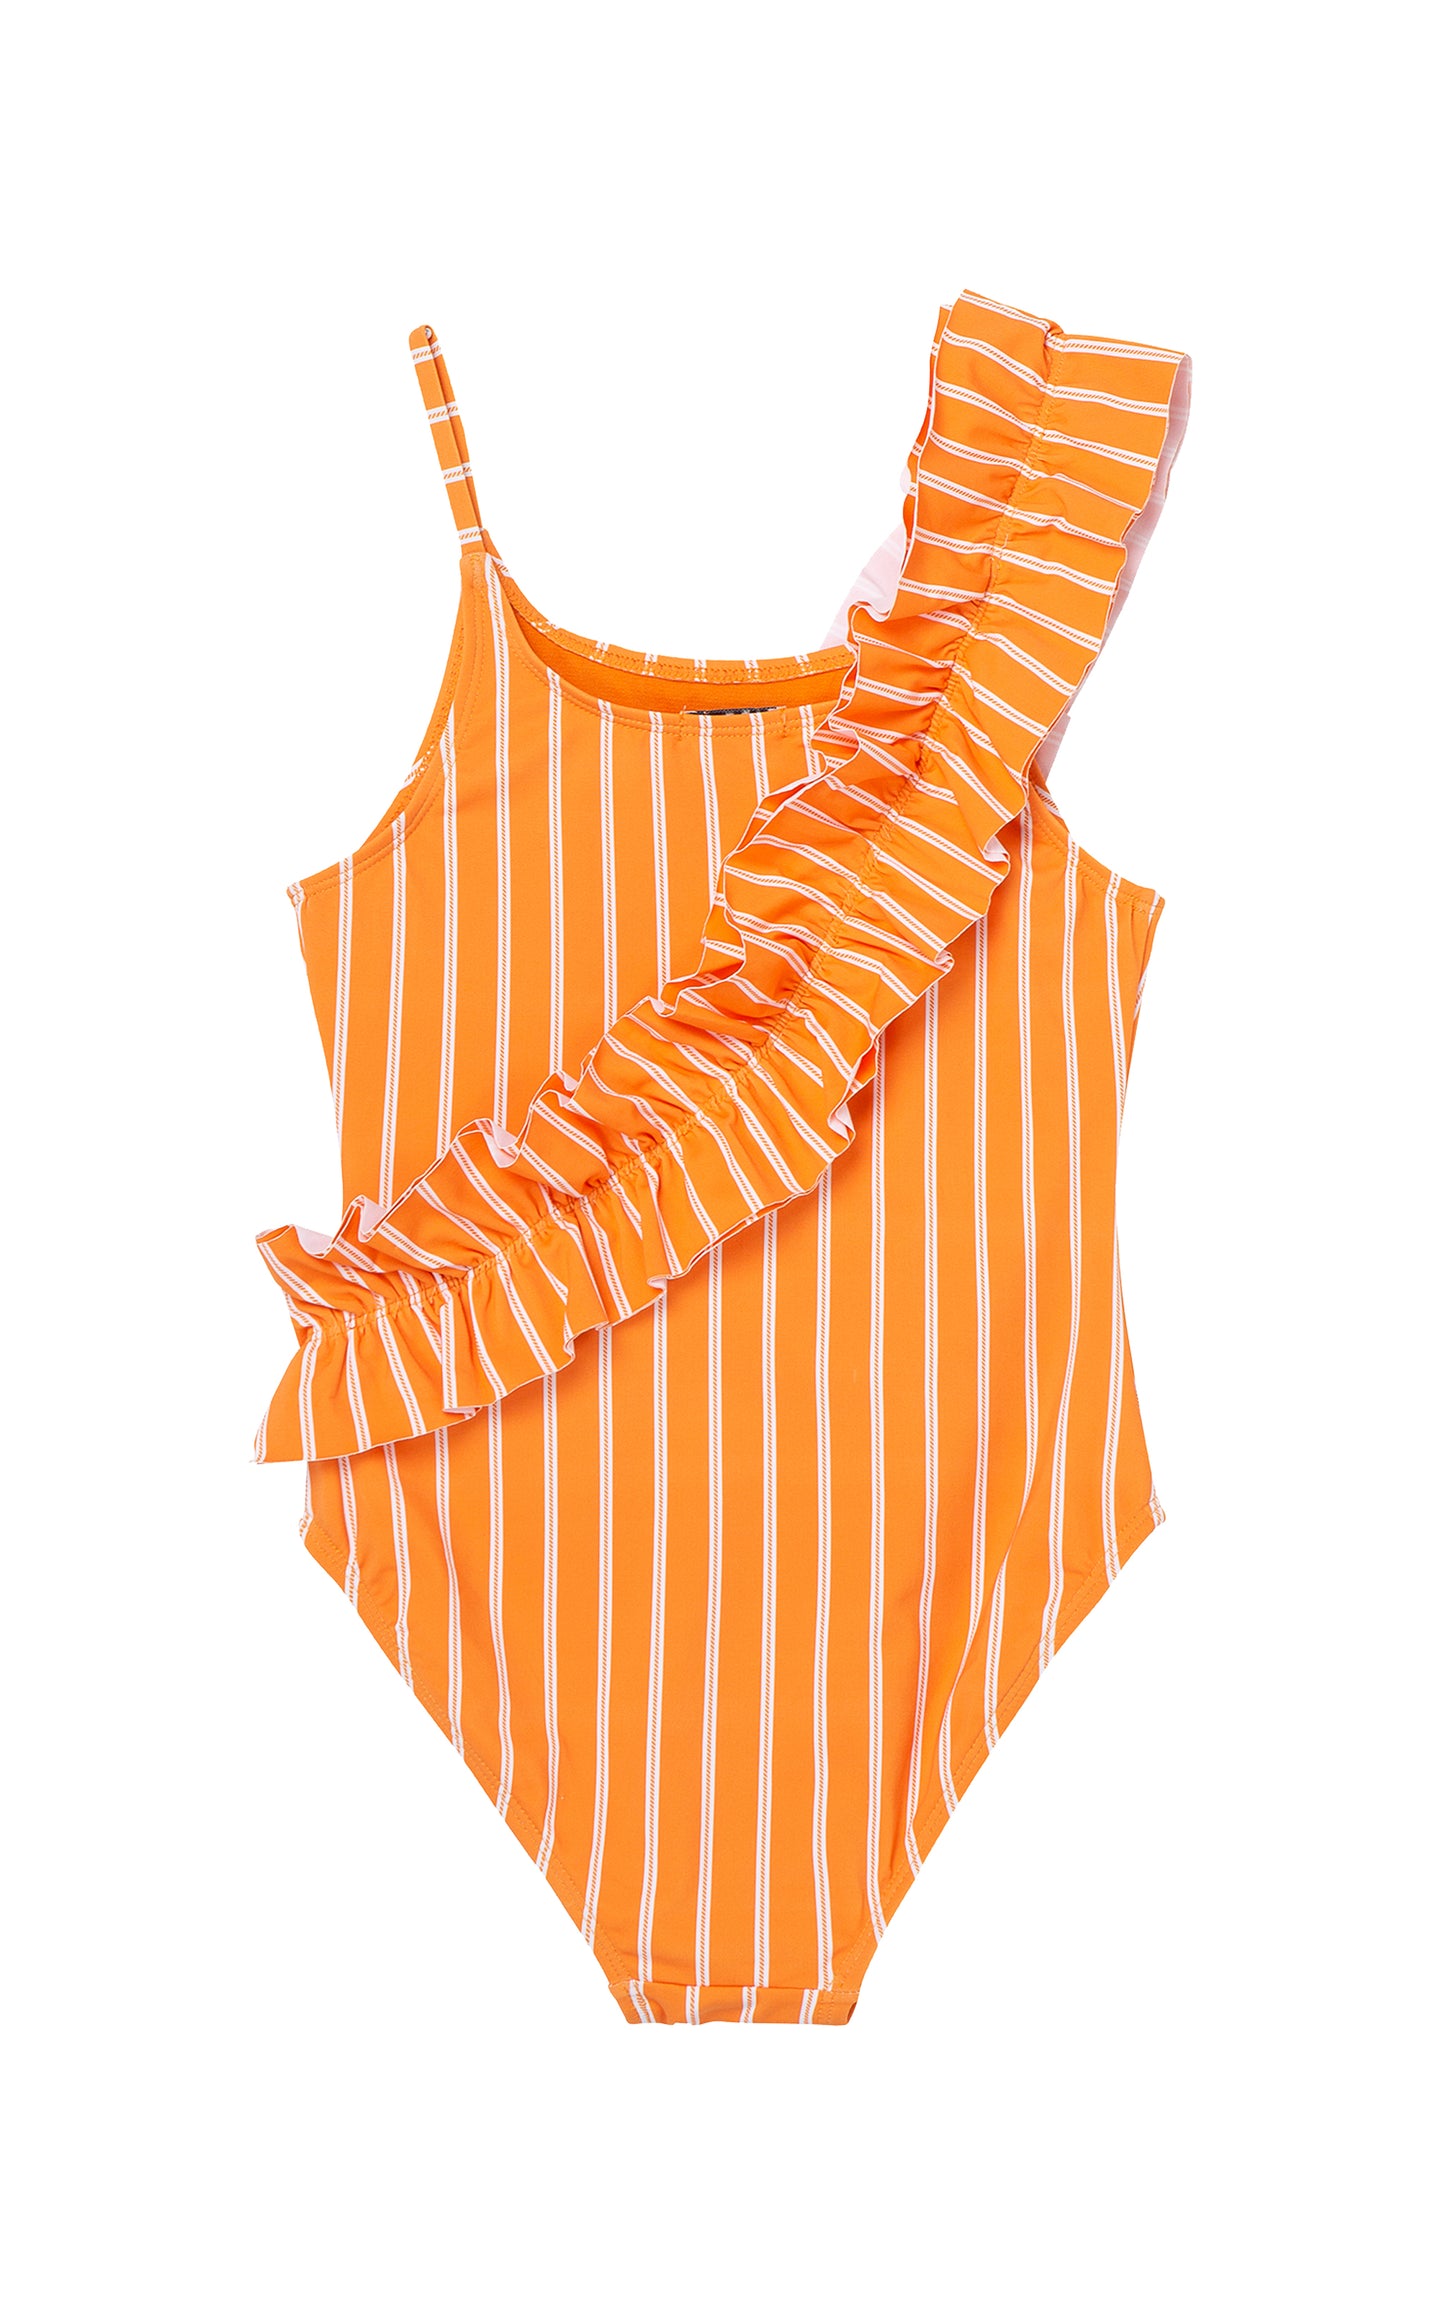 Back of orange ruched one-piece swimsuit with white stripes